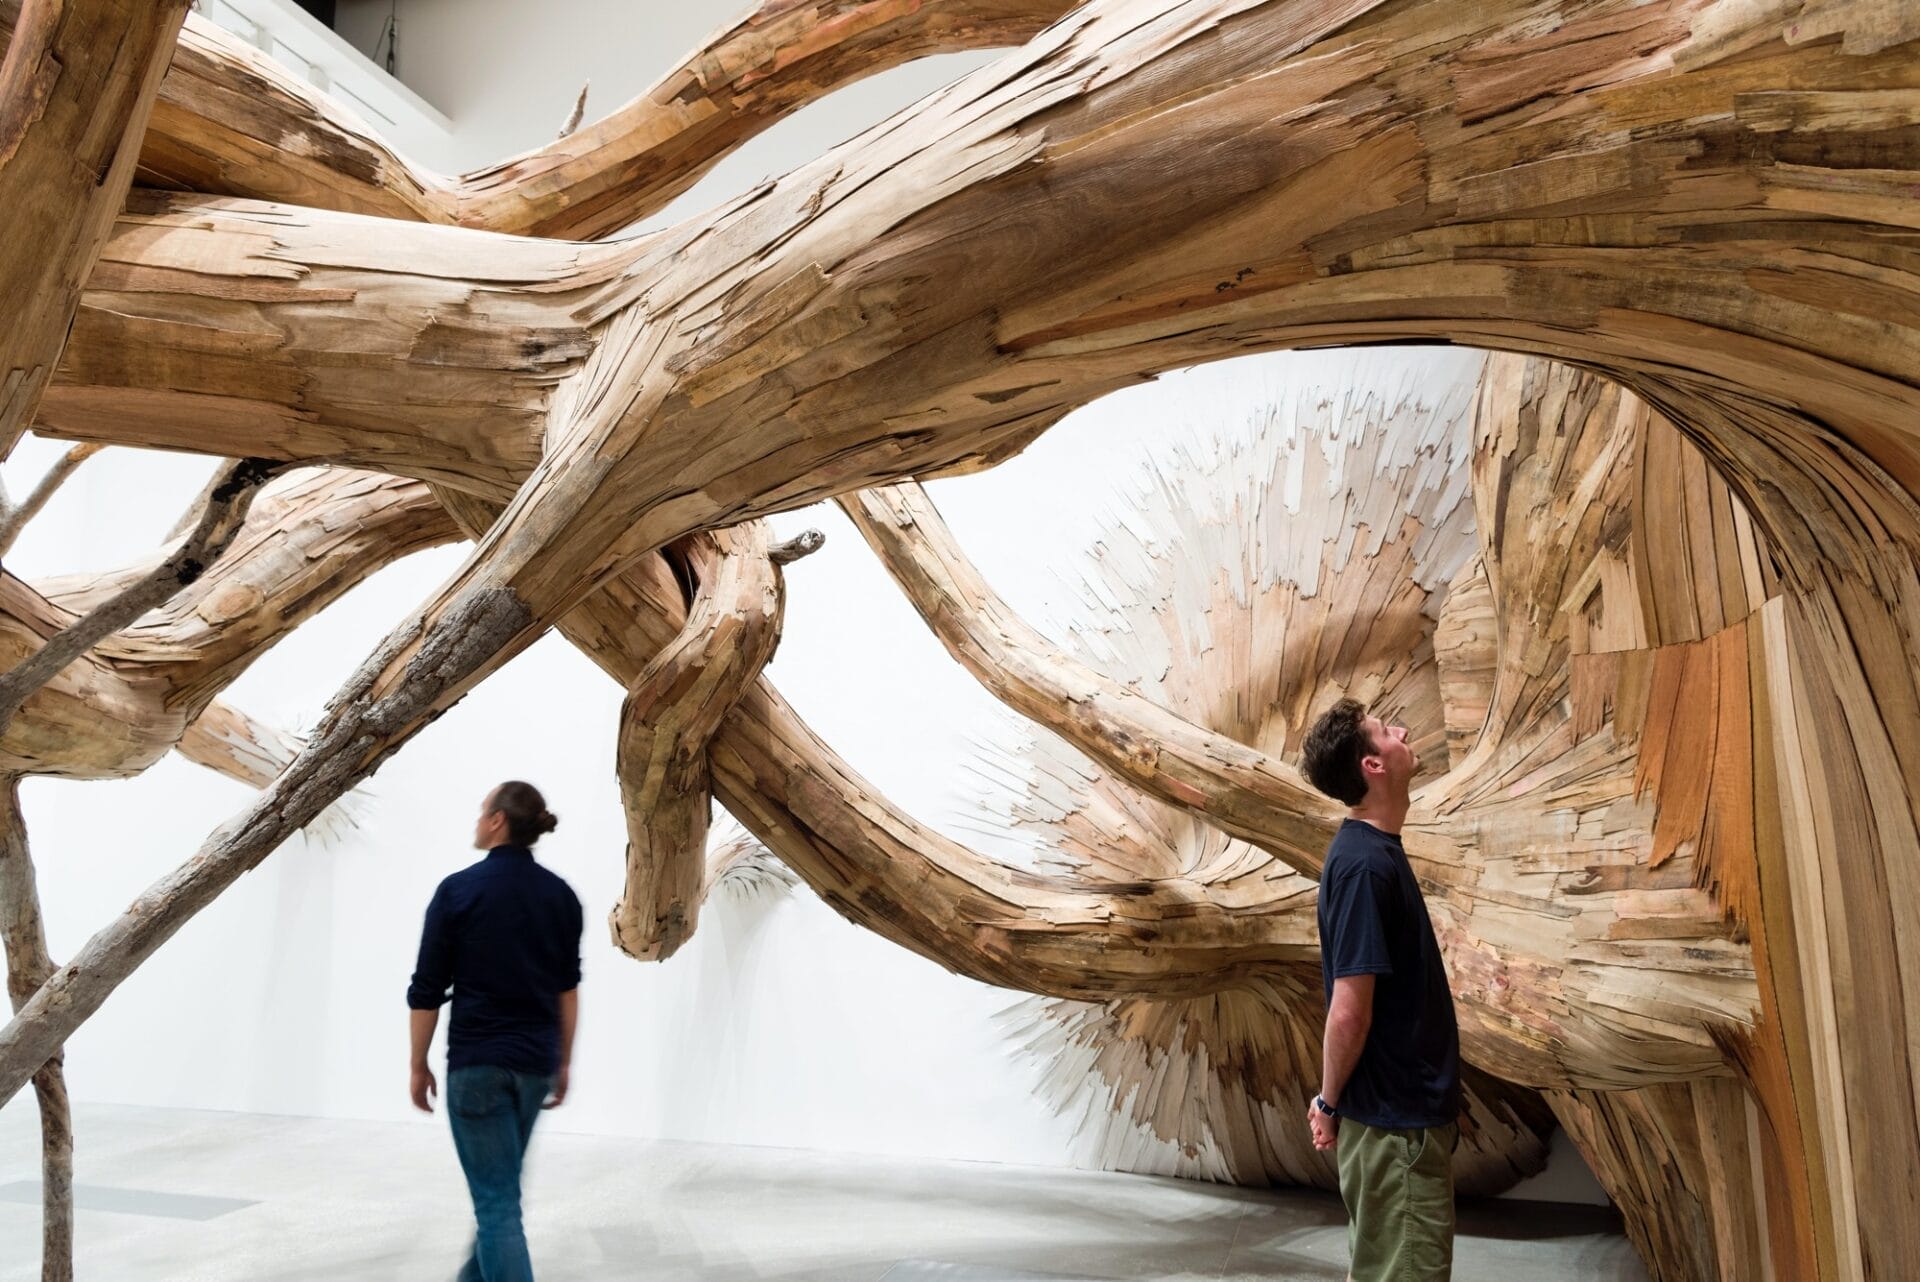 Detail of “Corupira” (2023), plywood, tapumes veneer, and tree branches, installation view of ‘Fairy Tales’ at Gallery of Modern Art Brisbane 2023. Photo by C Callistemon, © Henrique Oliveira and QAGOMA. All images courtesy of QAGOMA,